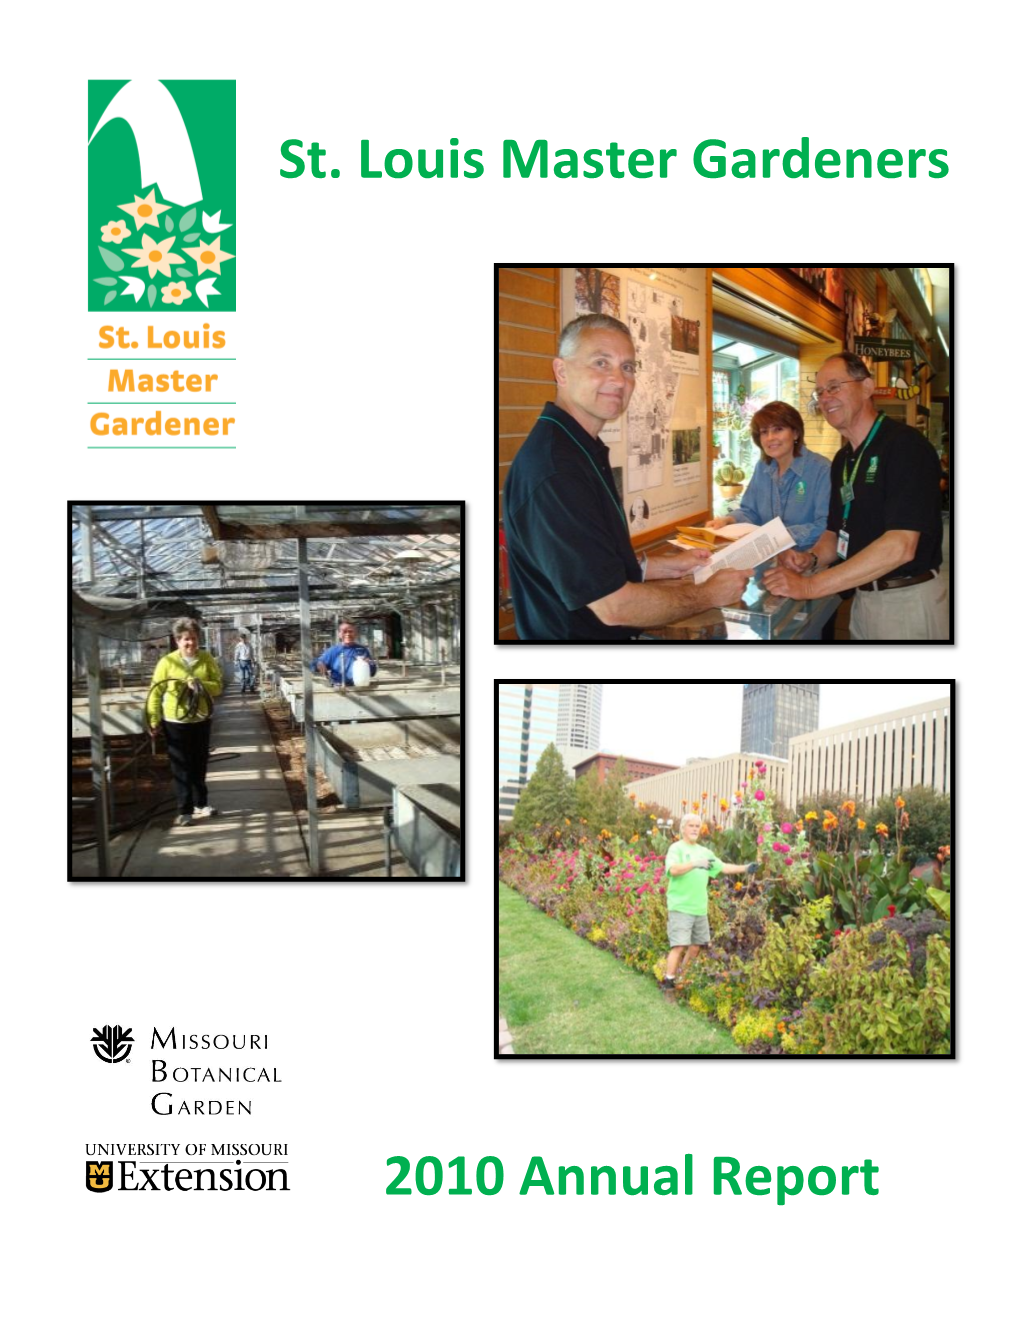 St. Louis Master Gardeners 2010 Annual Report